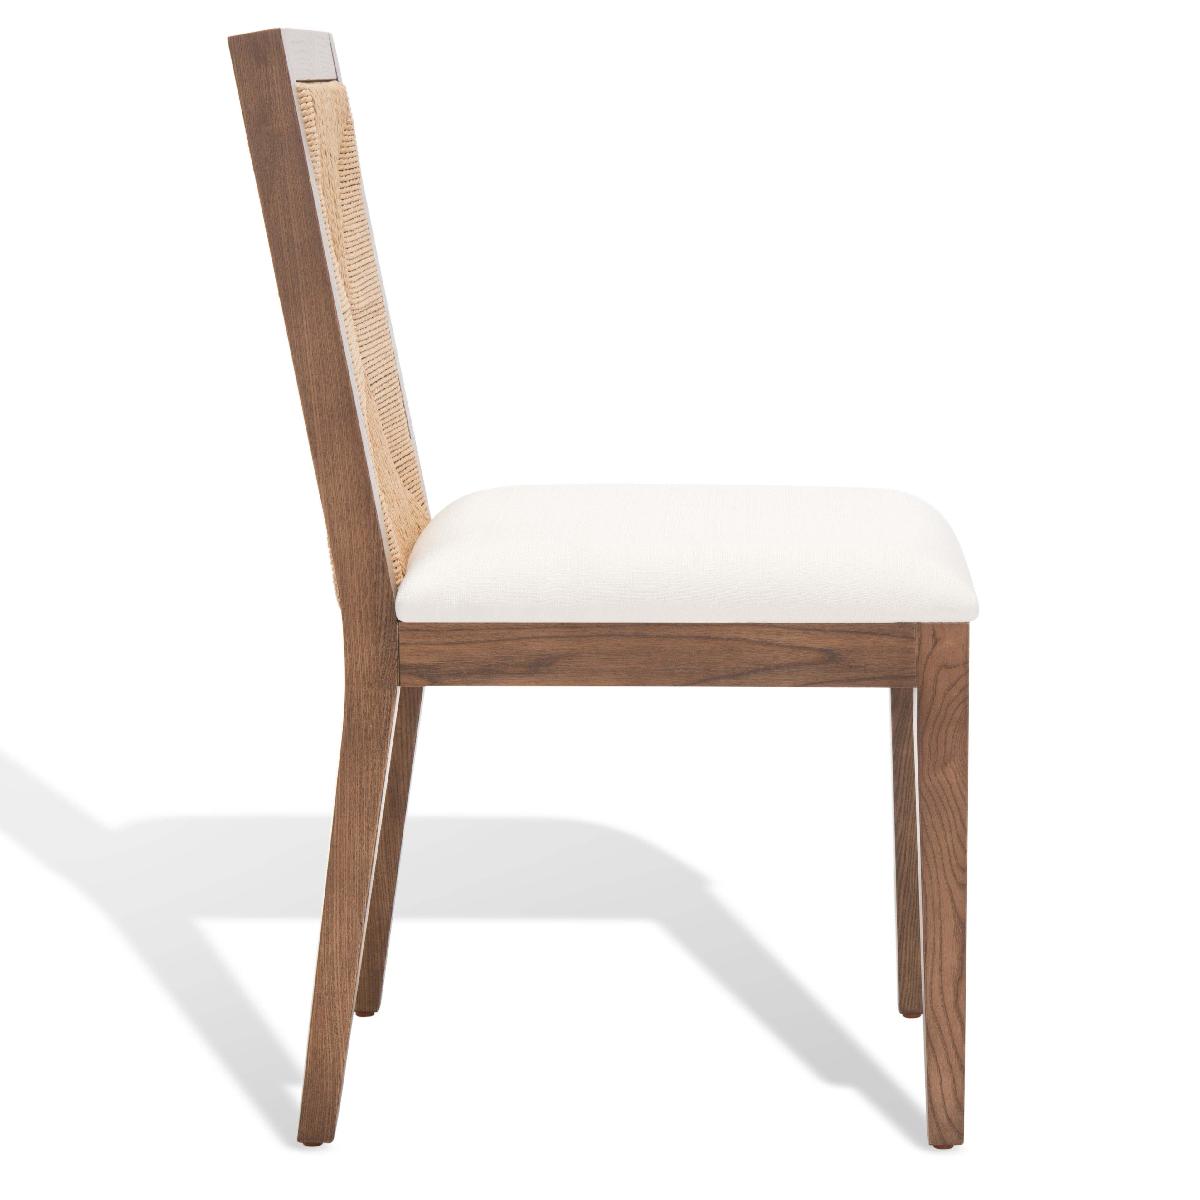 Safavieh Couture Emilio Woven Dining Chair - Walnut / Natural